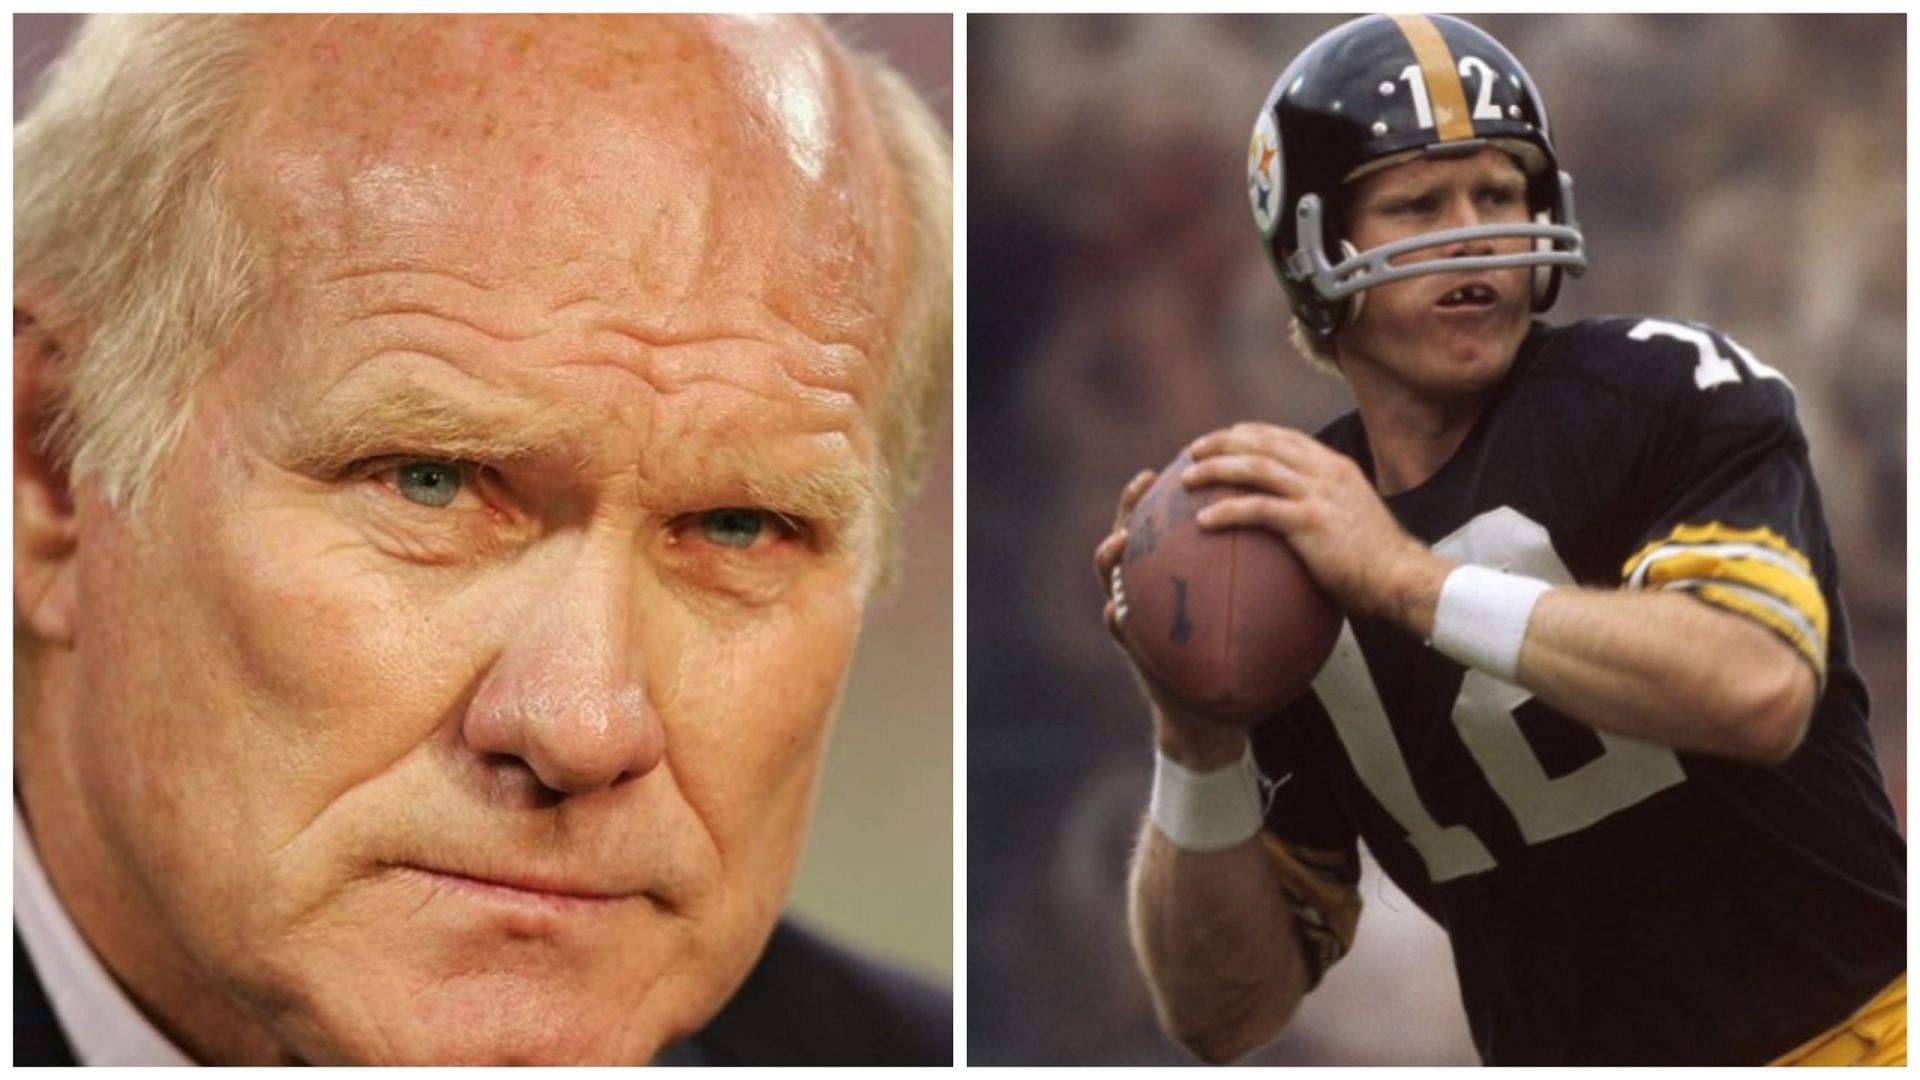 NFL Legend Terry Bradshaw opens up about health issues (Image via instagram)